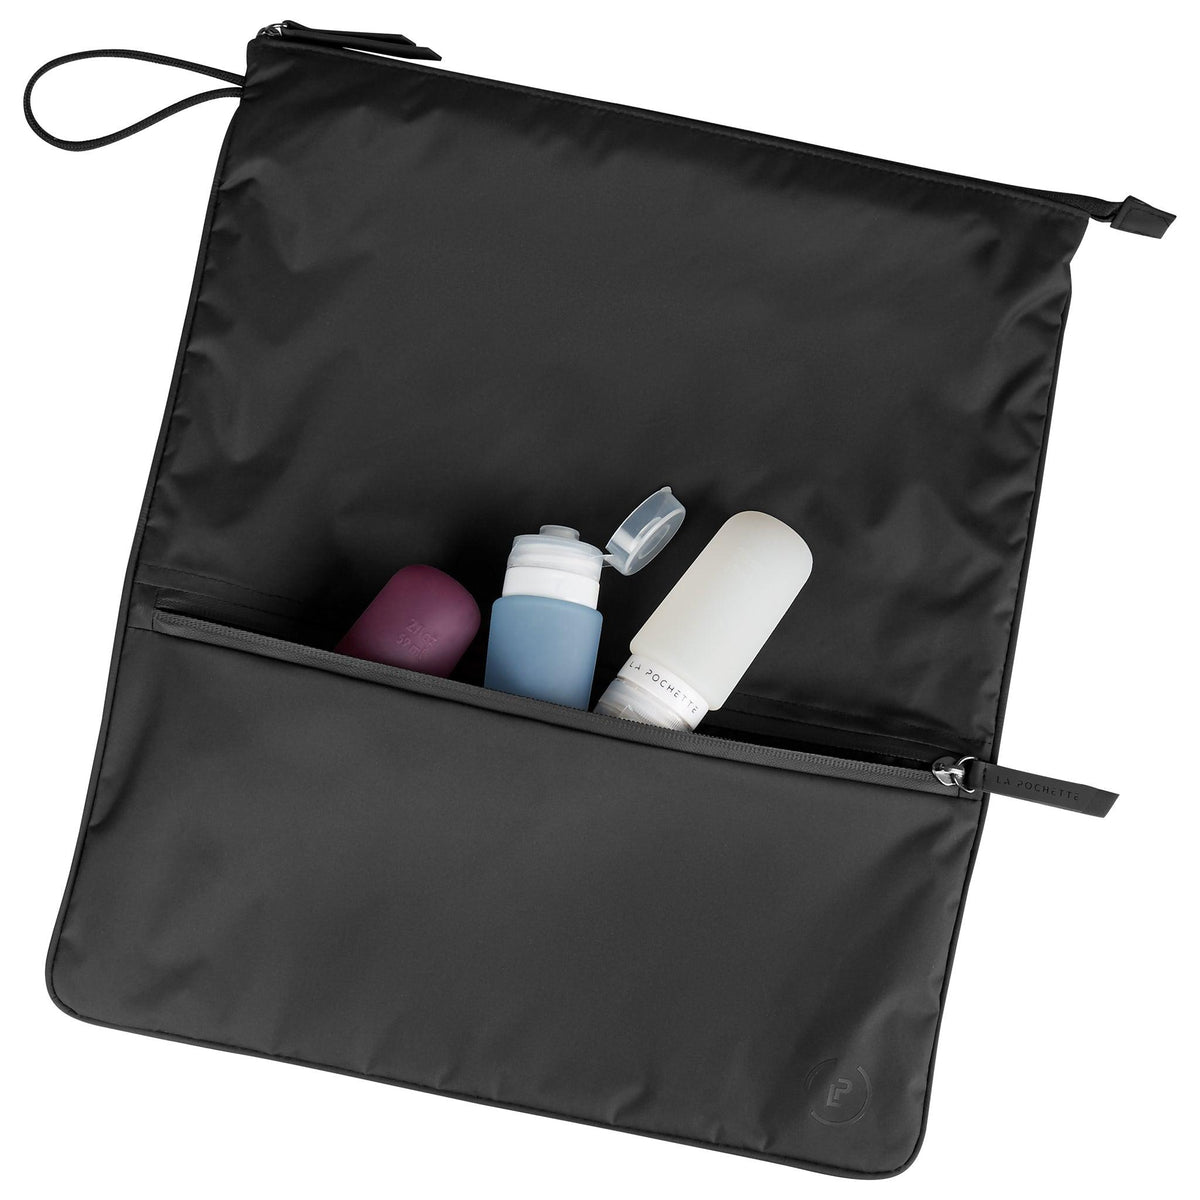 Ink Sweat Bag, shown flat and with two La Pochette silicone travel bottles resting on top and in front pocket